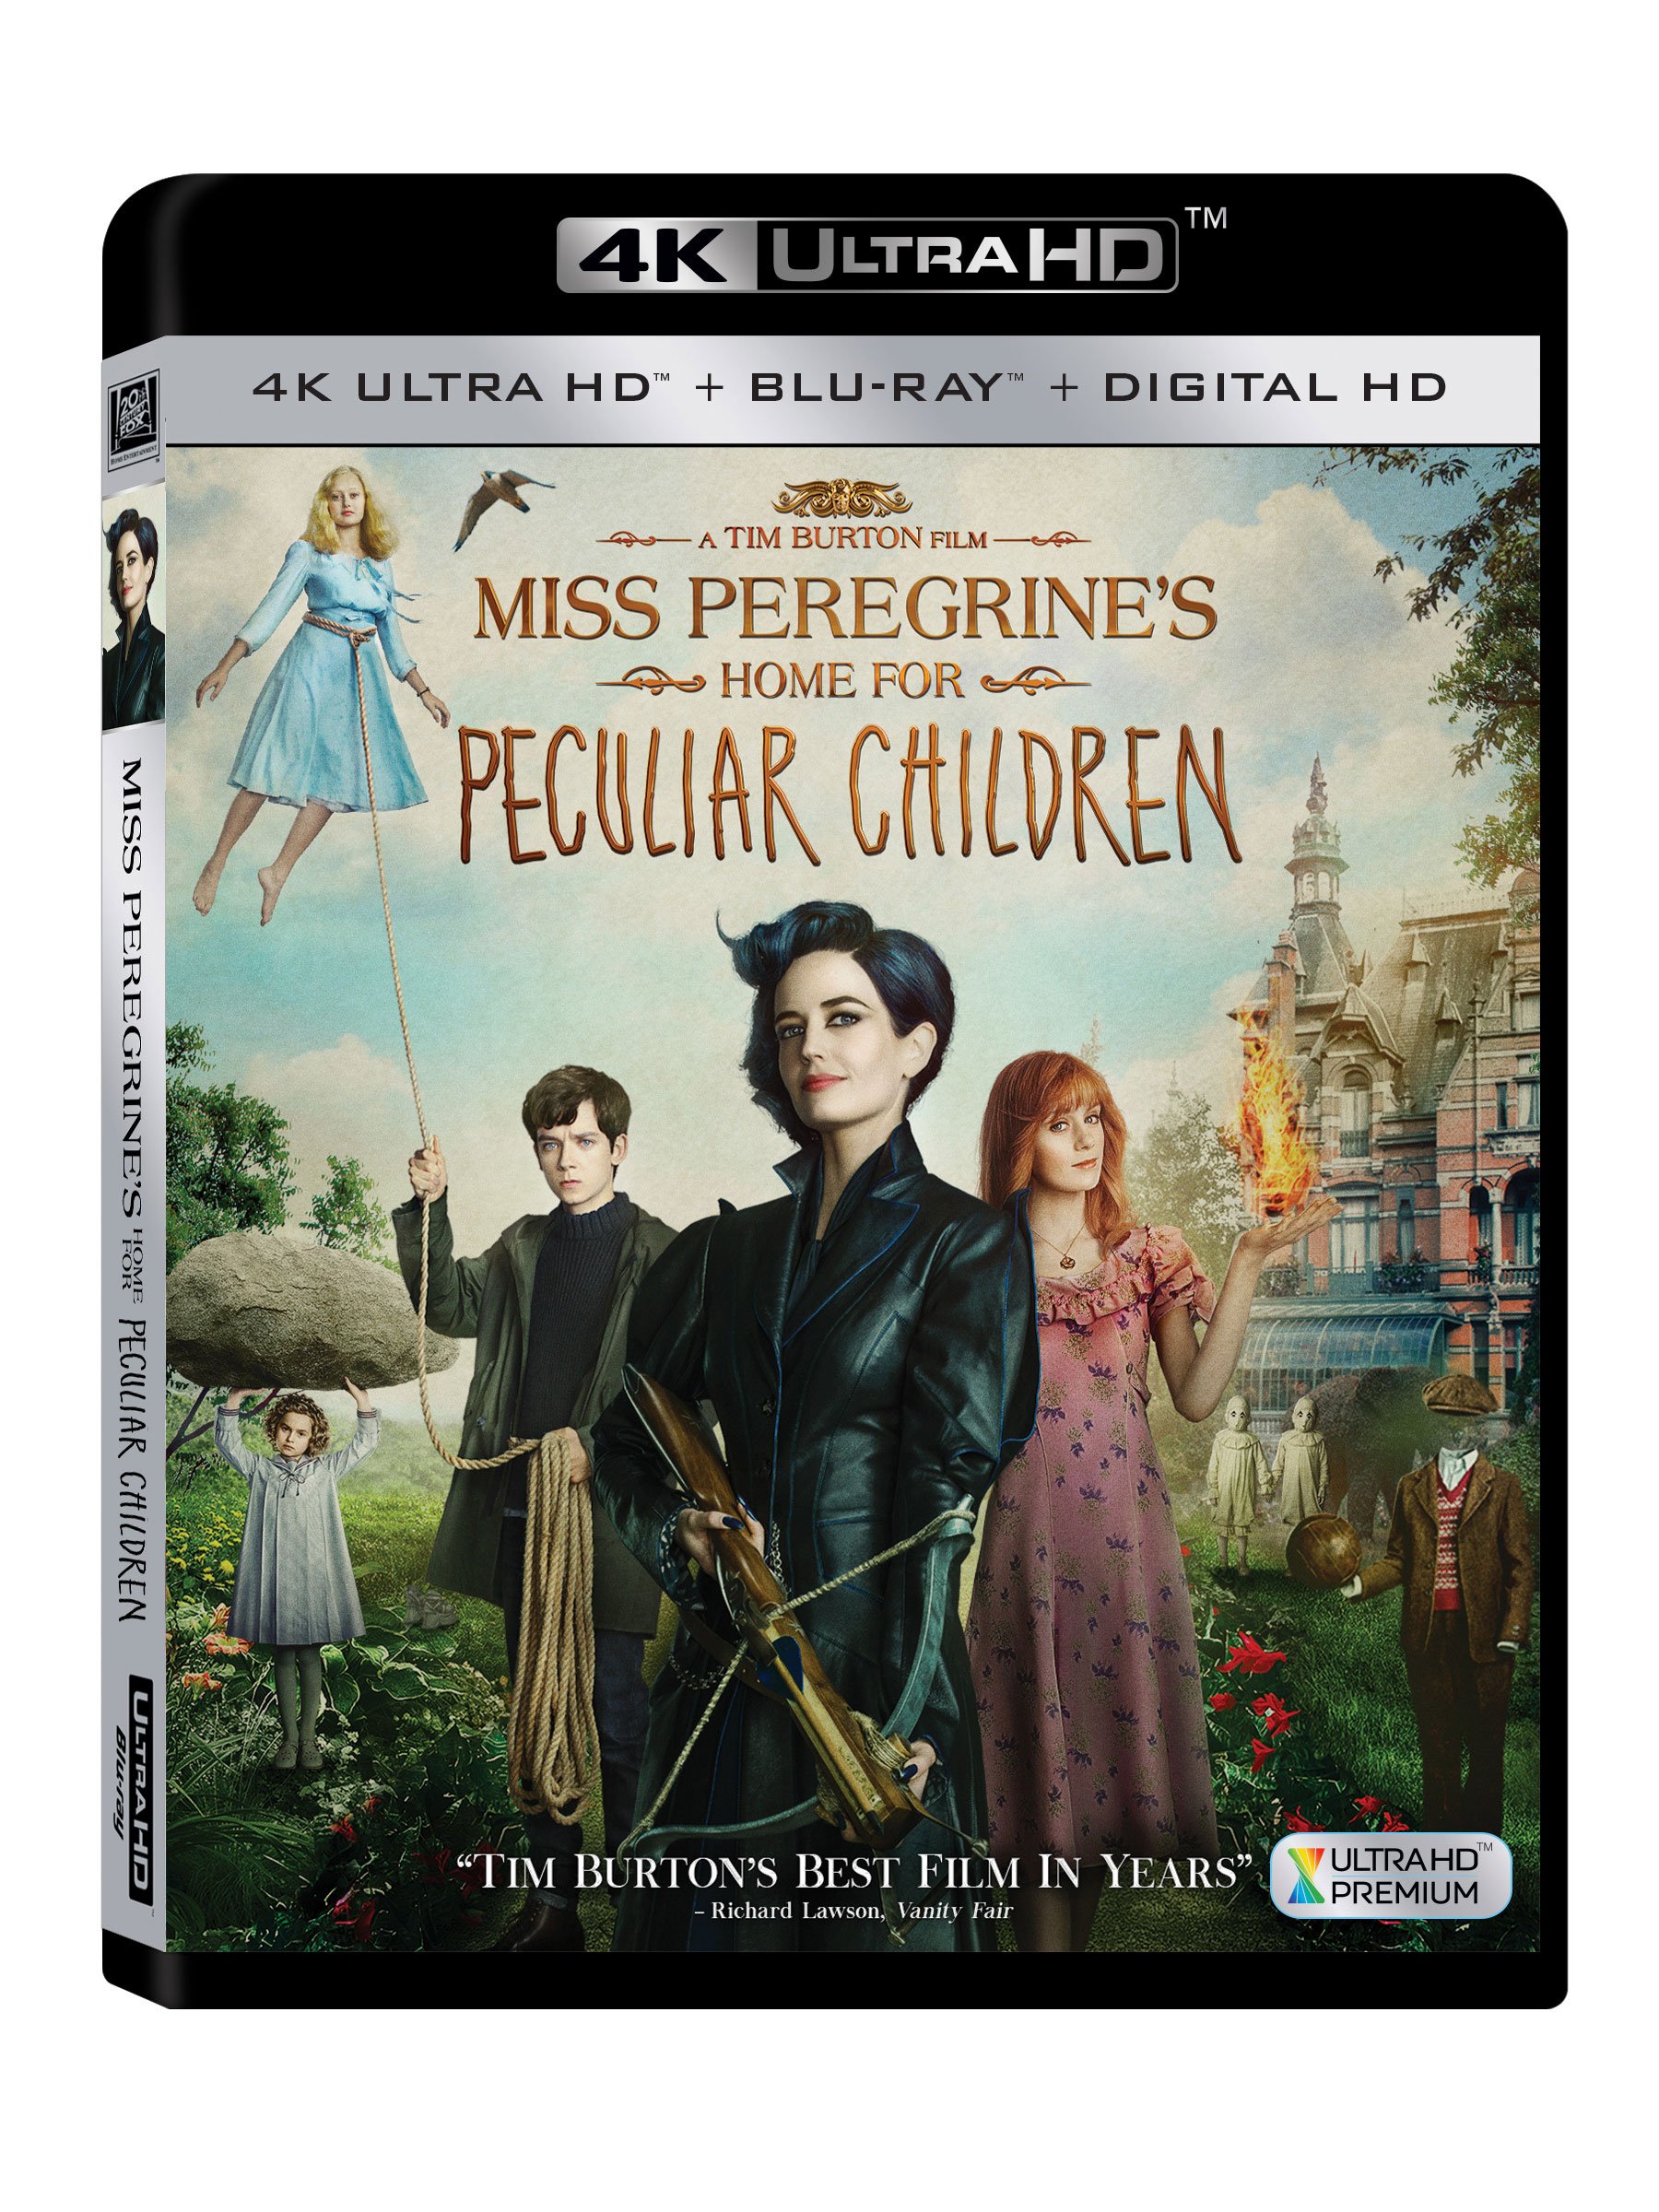 miss-peregrines-home-for-peculiar-child-4k-uhd-hd-movie-purchase